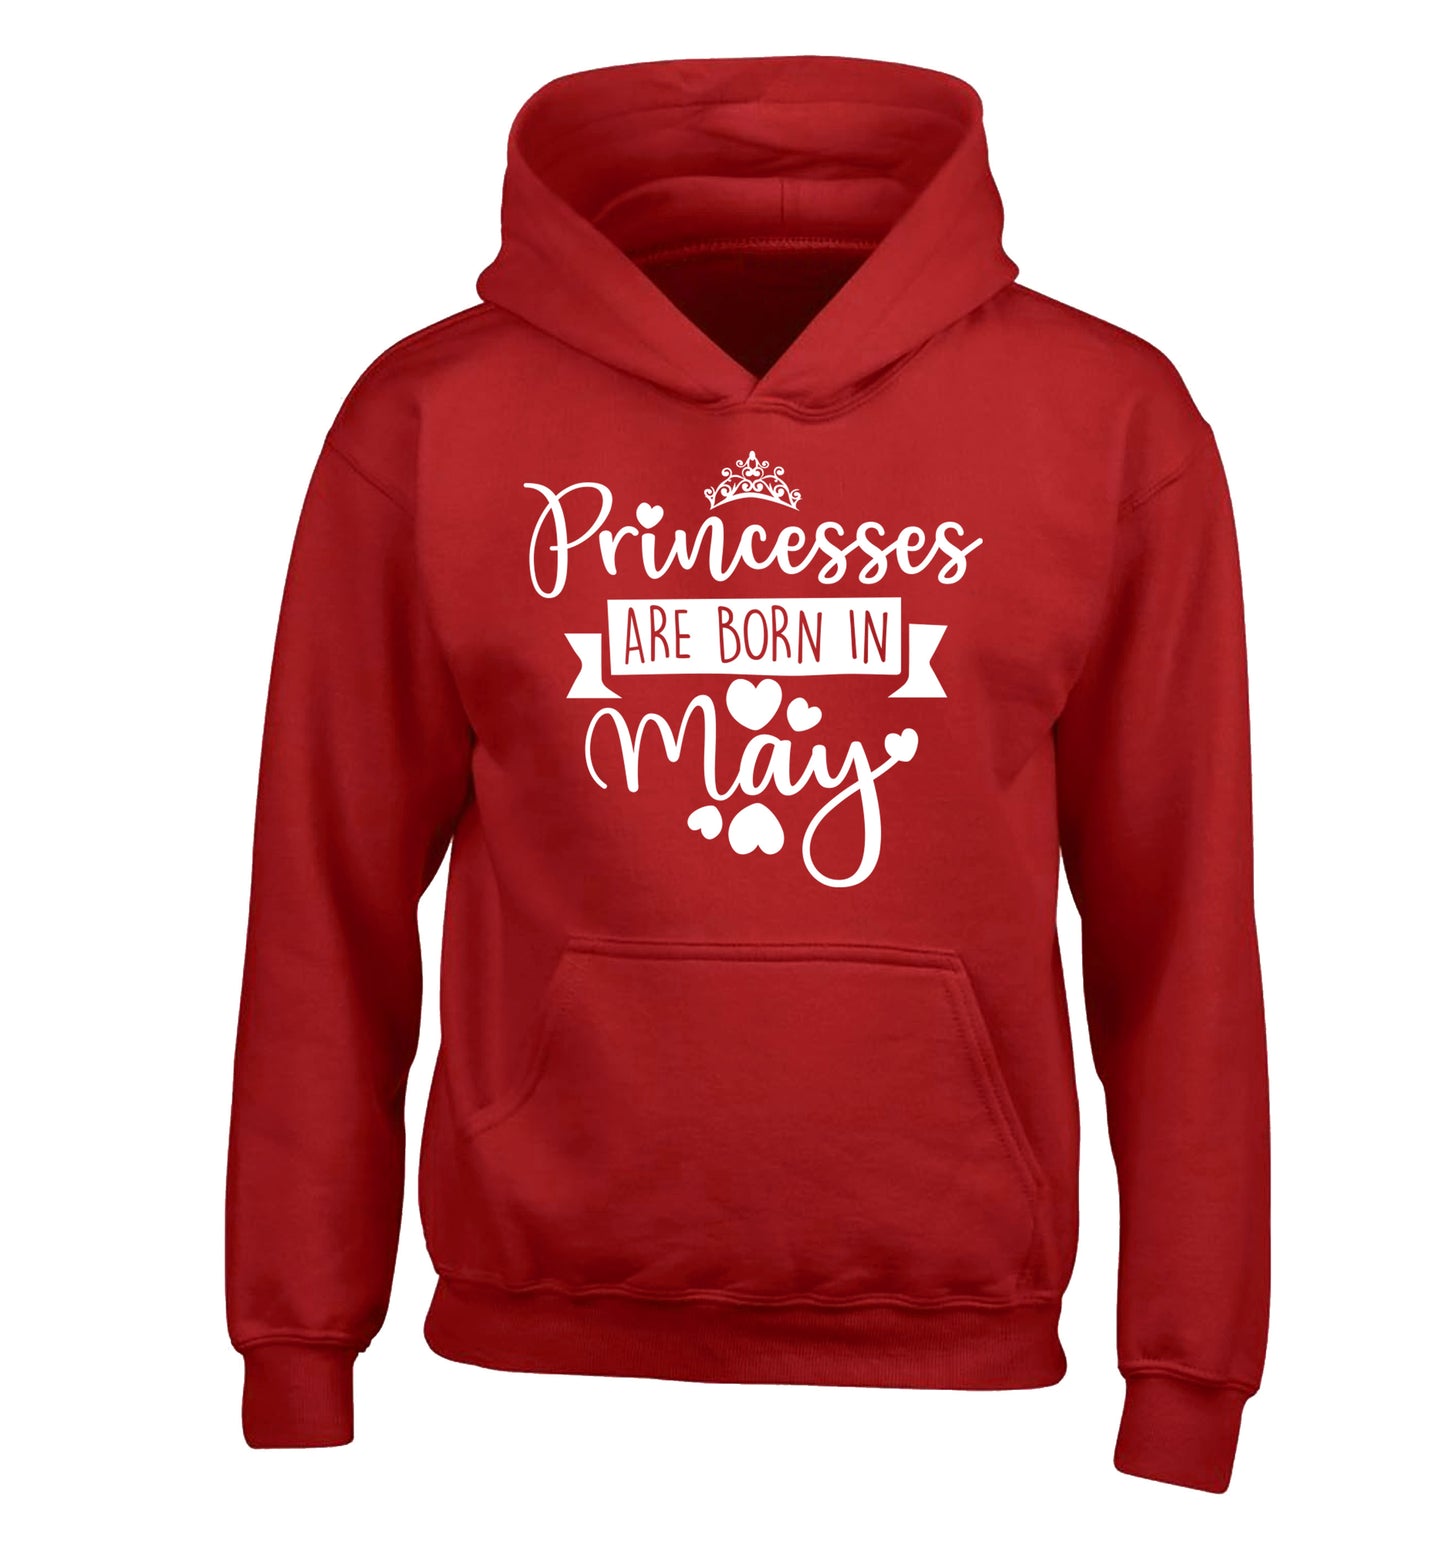 Princesses are born in May children's red hoodie 12-13 Years